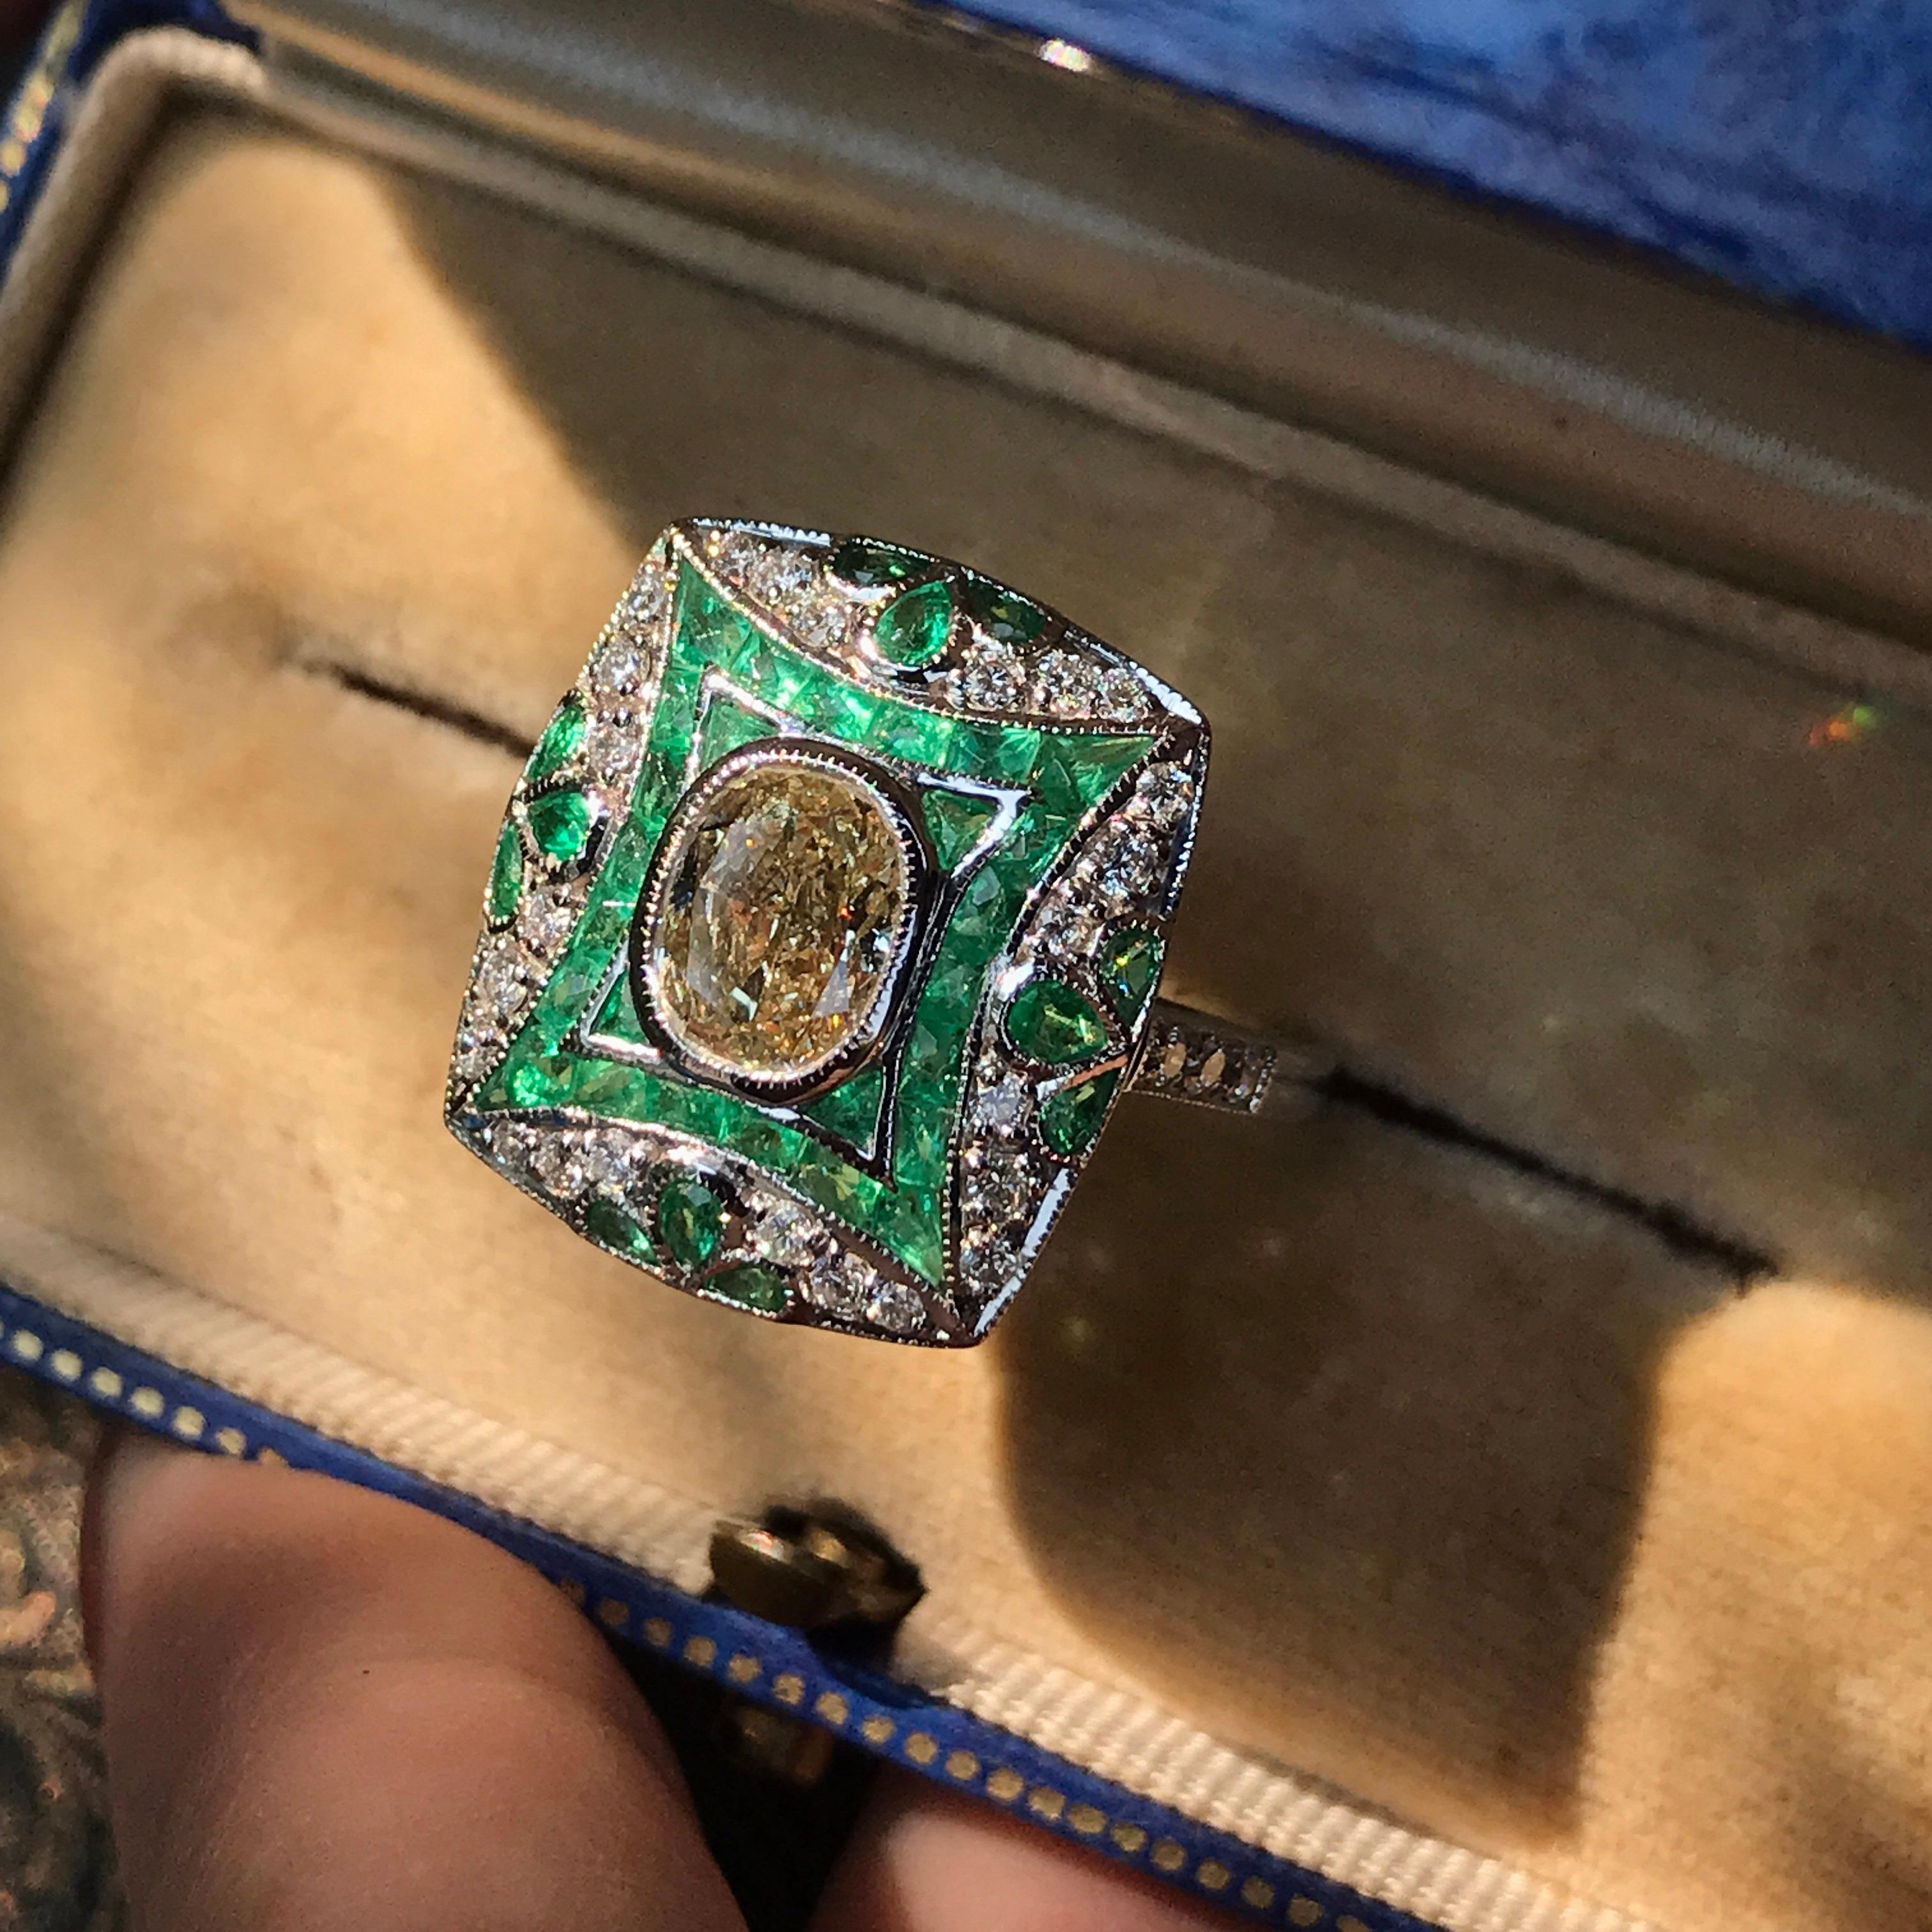 In this artful Vintage inspired ring, an oval shaped diamond glitters from the center of 18k white gold setting accented by French cut emeralds and round diamonds. The emeralds were add for its lively green leaves motif, producing a beautiful and